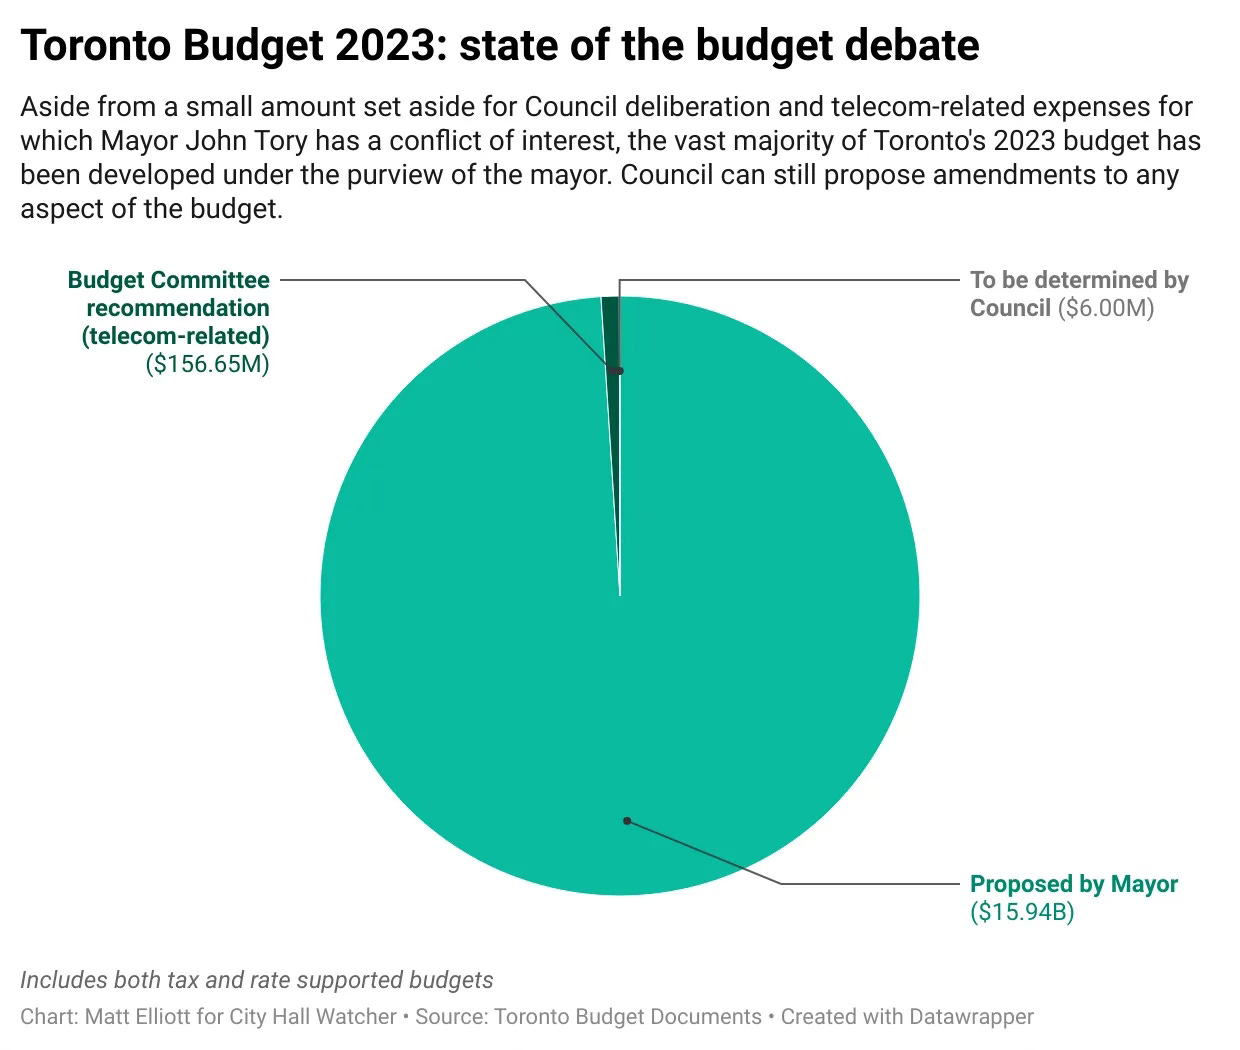 Chart showing breakdown of 2023 budget proposed by mayor